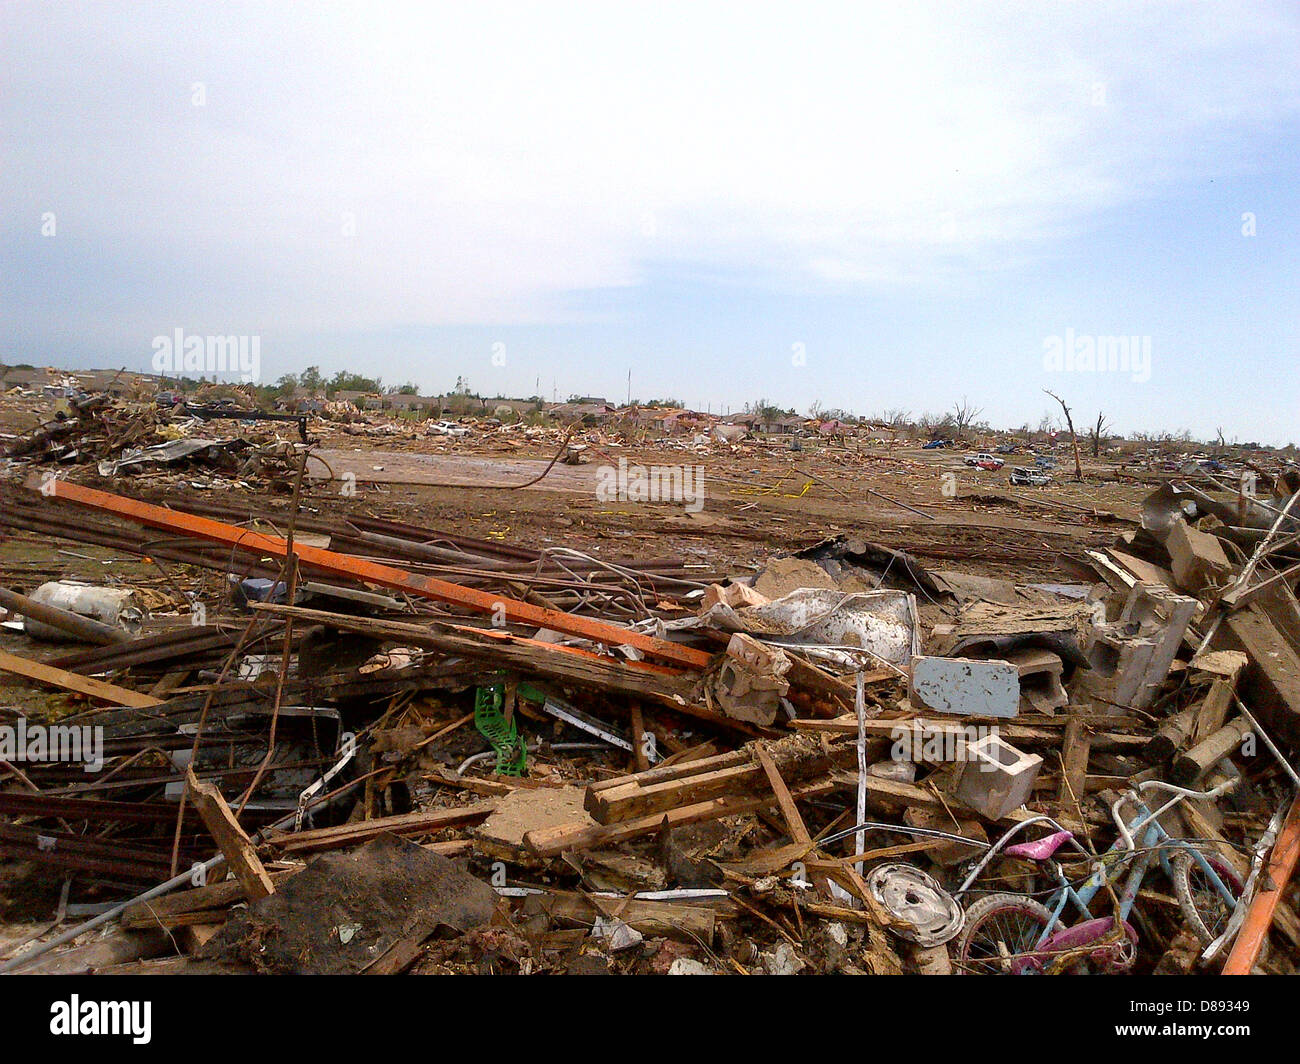 Aftermath of destroyed homes leveled by an EF-5 tornado May 21, 2013 in Moore, Oklahoma. The massive storm with winds exceeding 200 miles per hour tore through the Oklahoma City suburb May 20, 2013, killing at least 24 people, injuring more than 230 and displacing thousands. Stock Photo